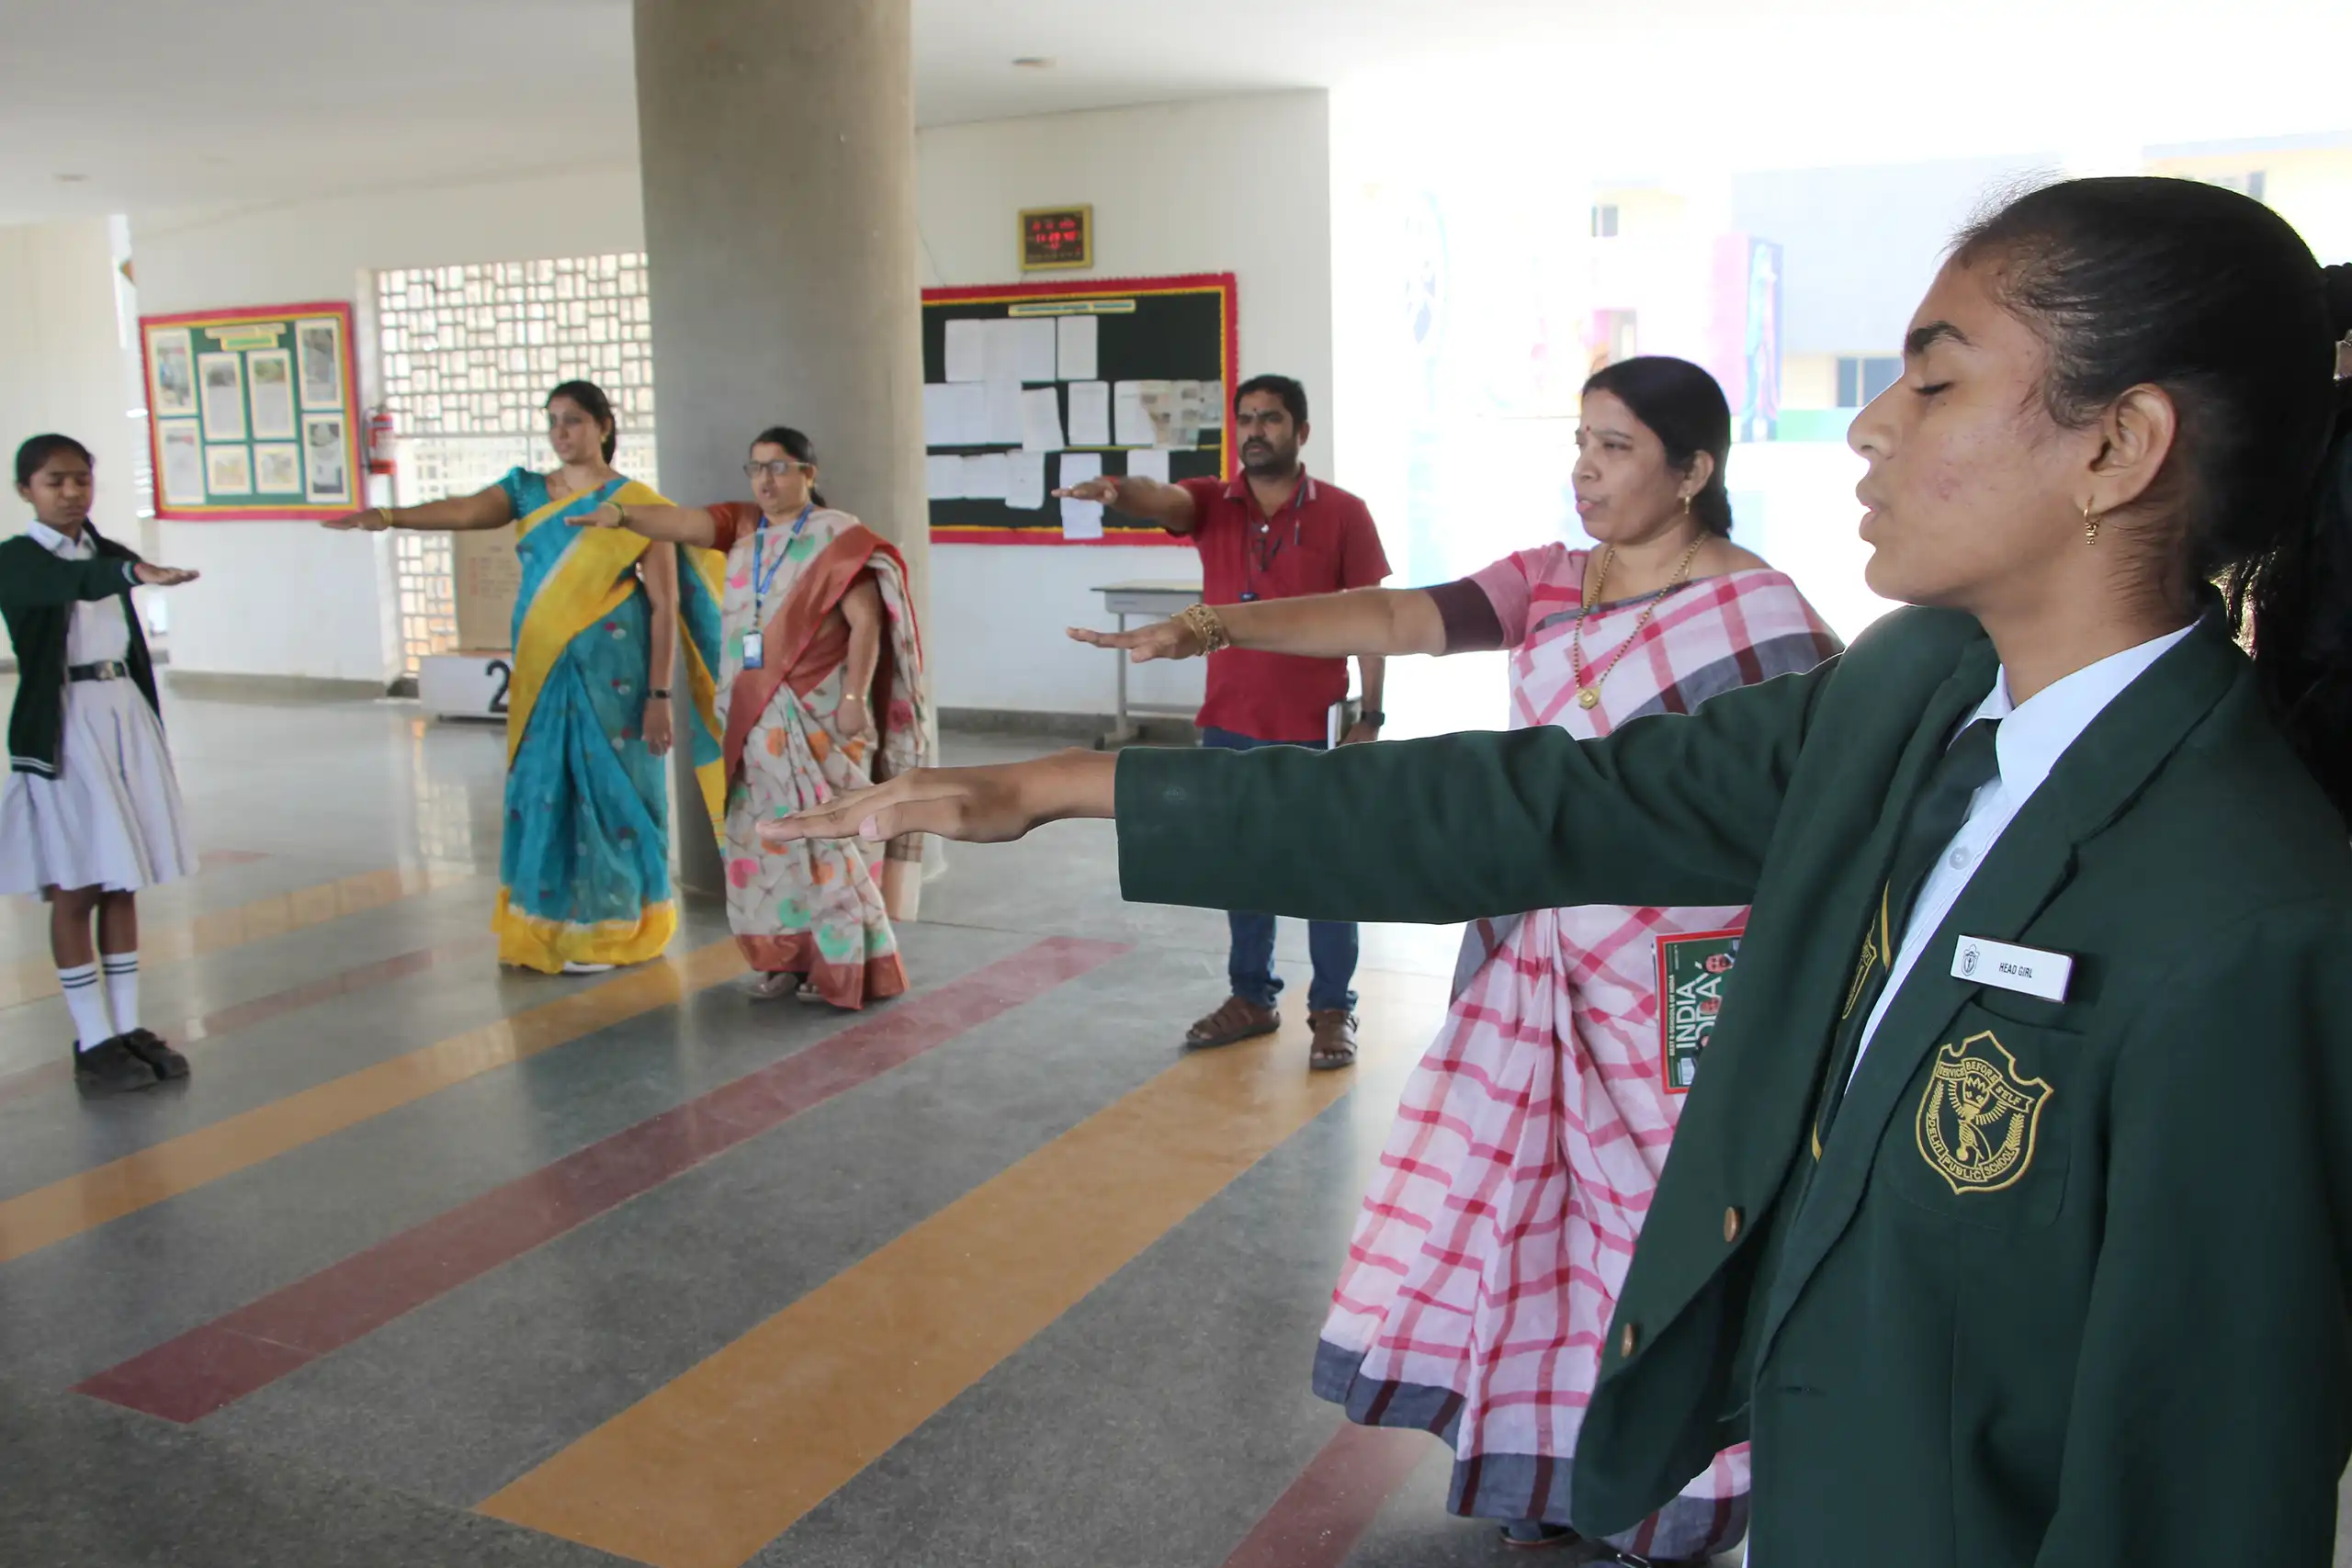 At DPS Warangal, National Constitution Day was celebrated where students and teachers took oath.